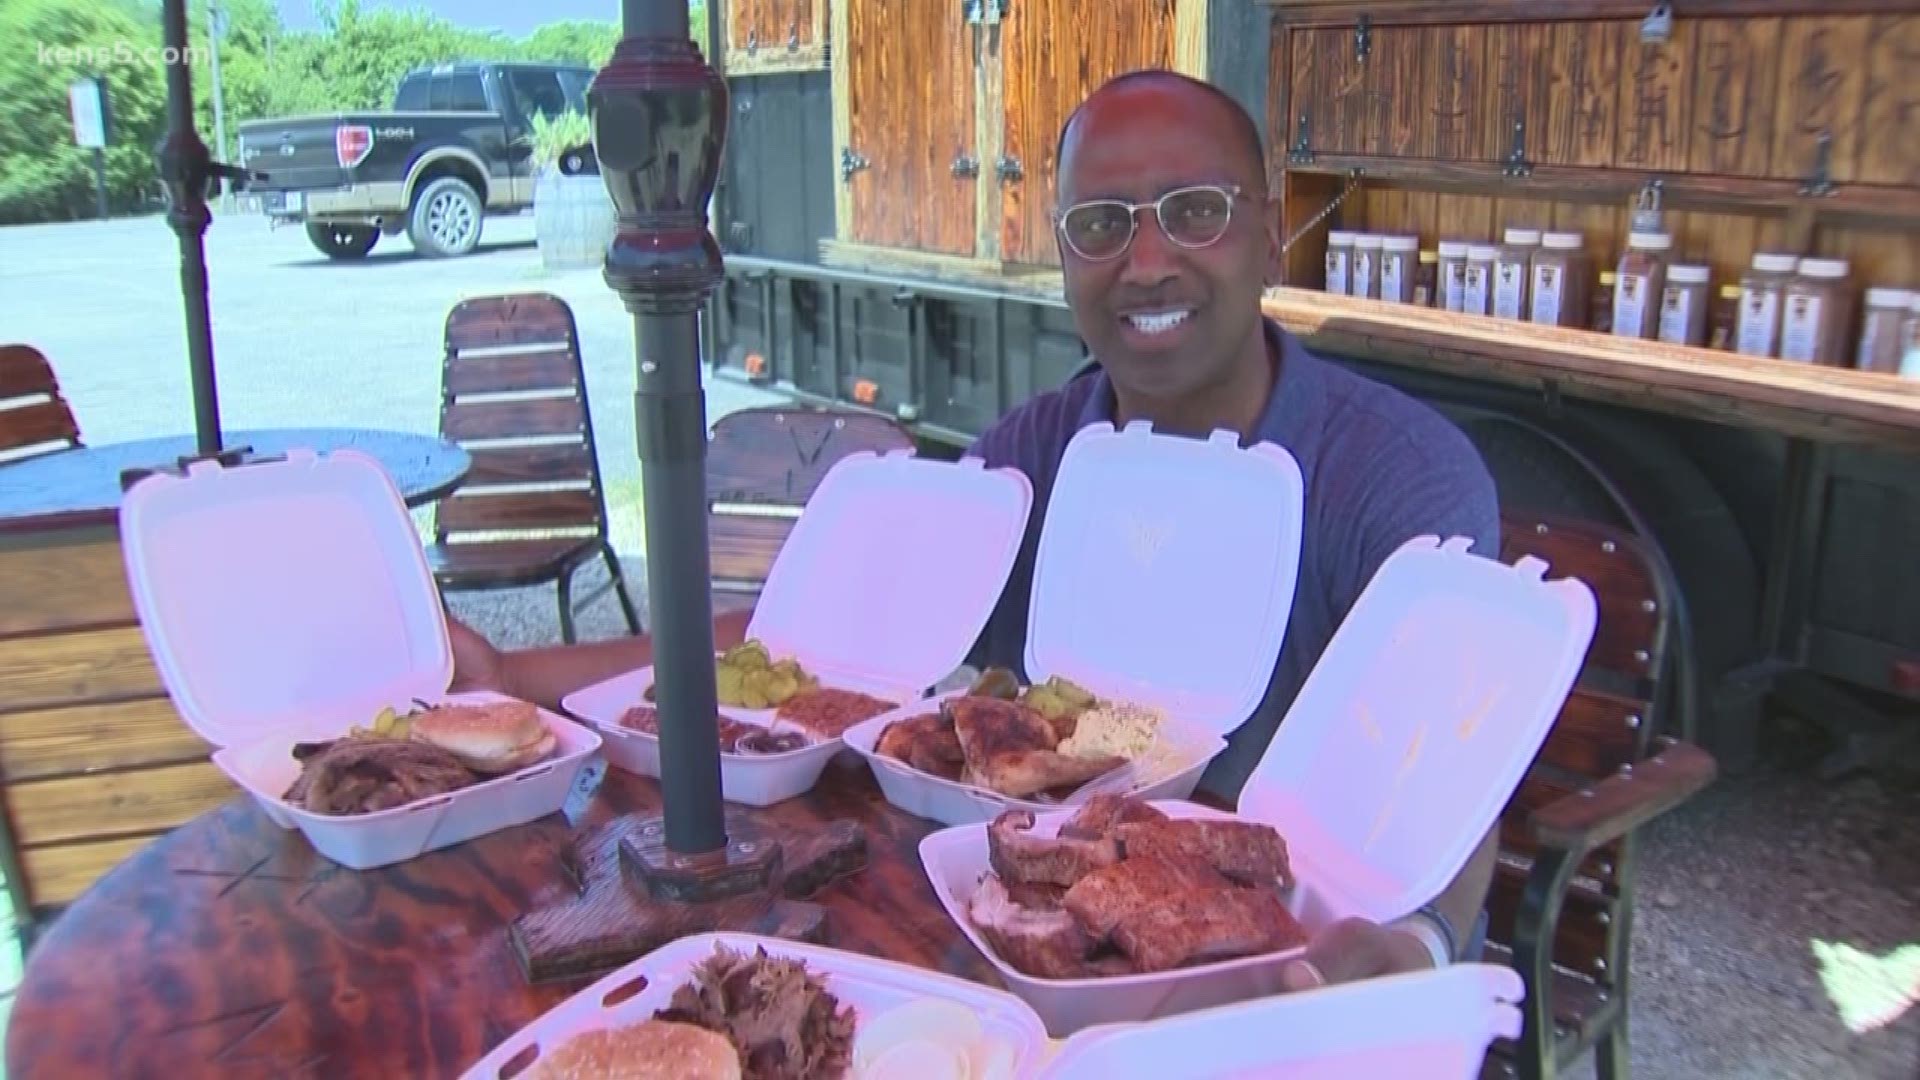 Main Street in Bandera is where you can find Chicken Charley's, a barbecue truck with hefty portions. Marvin Hurst checks it out in the Great Grill Almighty Tour in Neighborhood Eats.